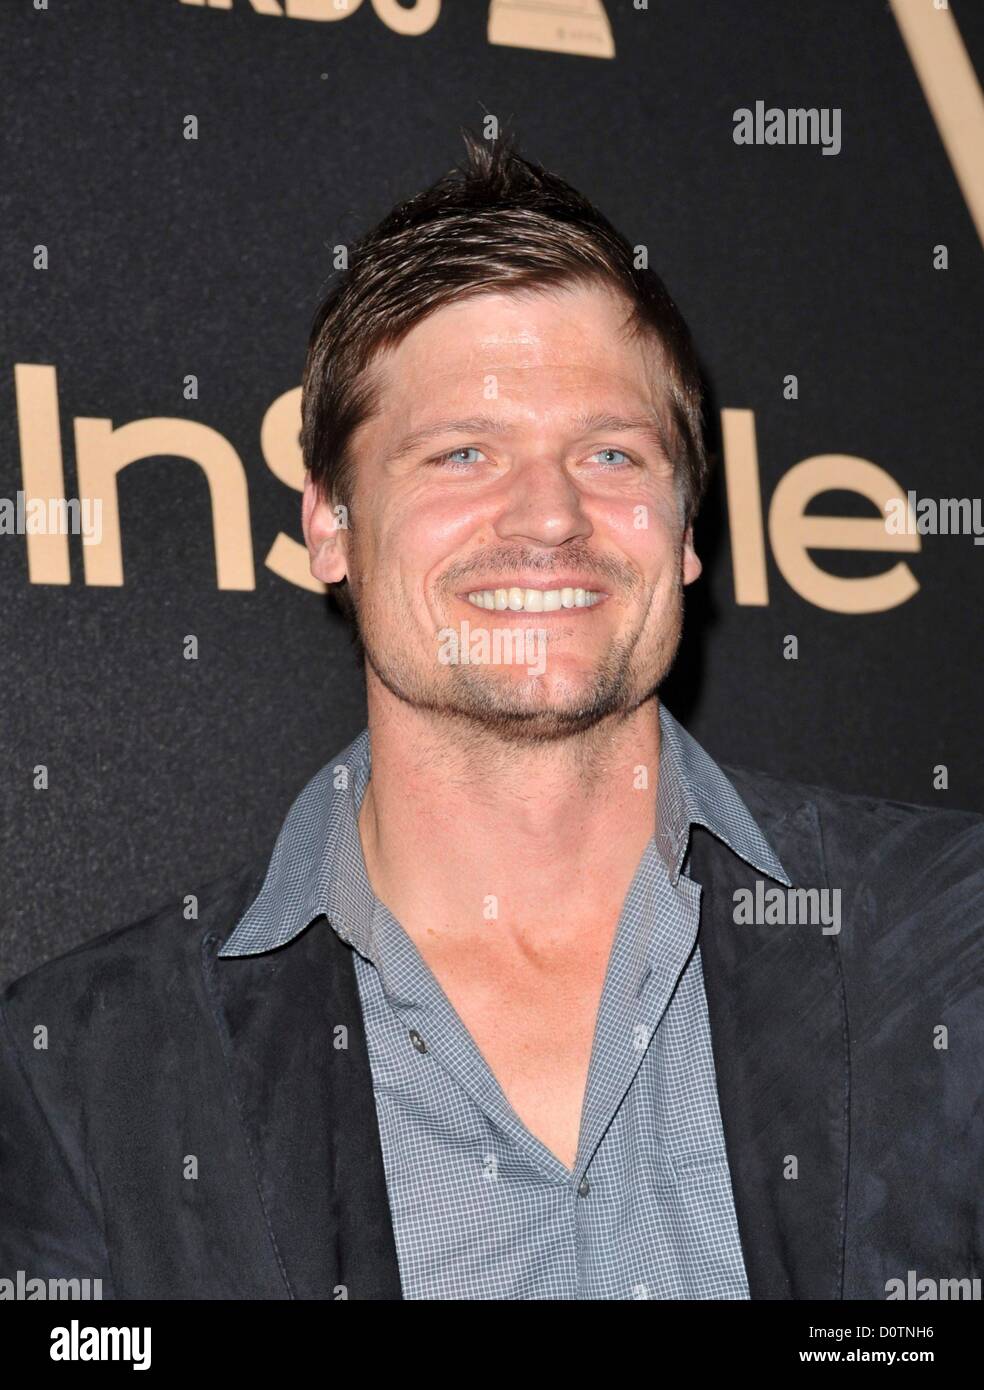 Los Angeles, USA. 29th November 2012. Bailey Chase at arrivals for The Hollywood Foreign Press Association And InStyle Miss Golden Globe 2013 Party, West Hollywood, Los Angeles, CA November 29, 2012. Photo By: Elizabeth Goodenough/Everett Collection Stock Photo